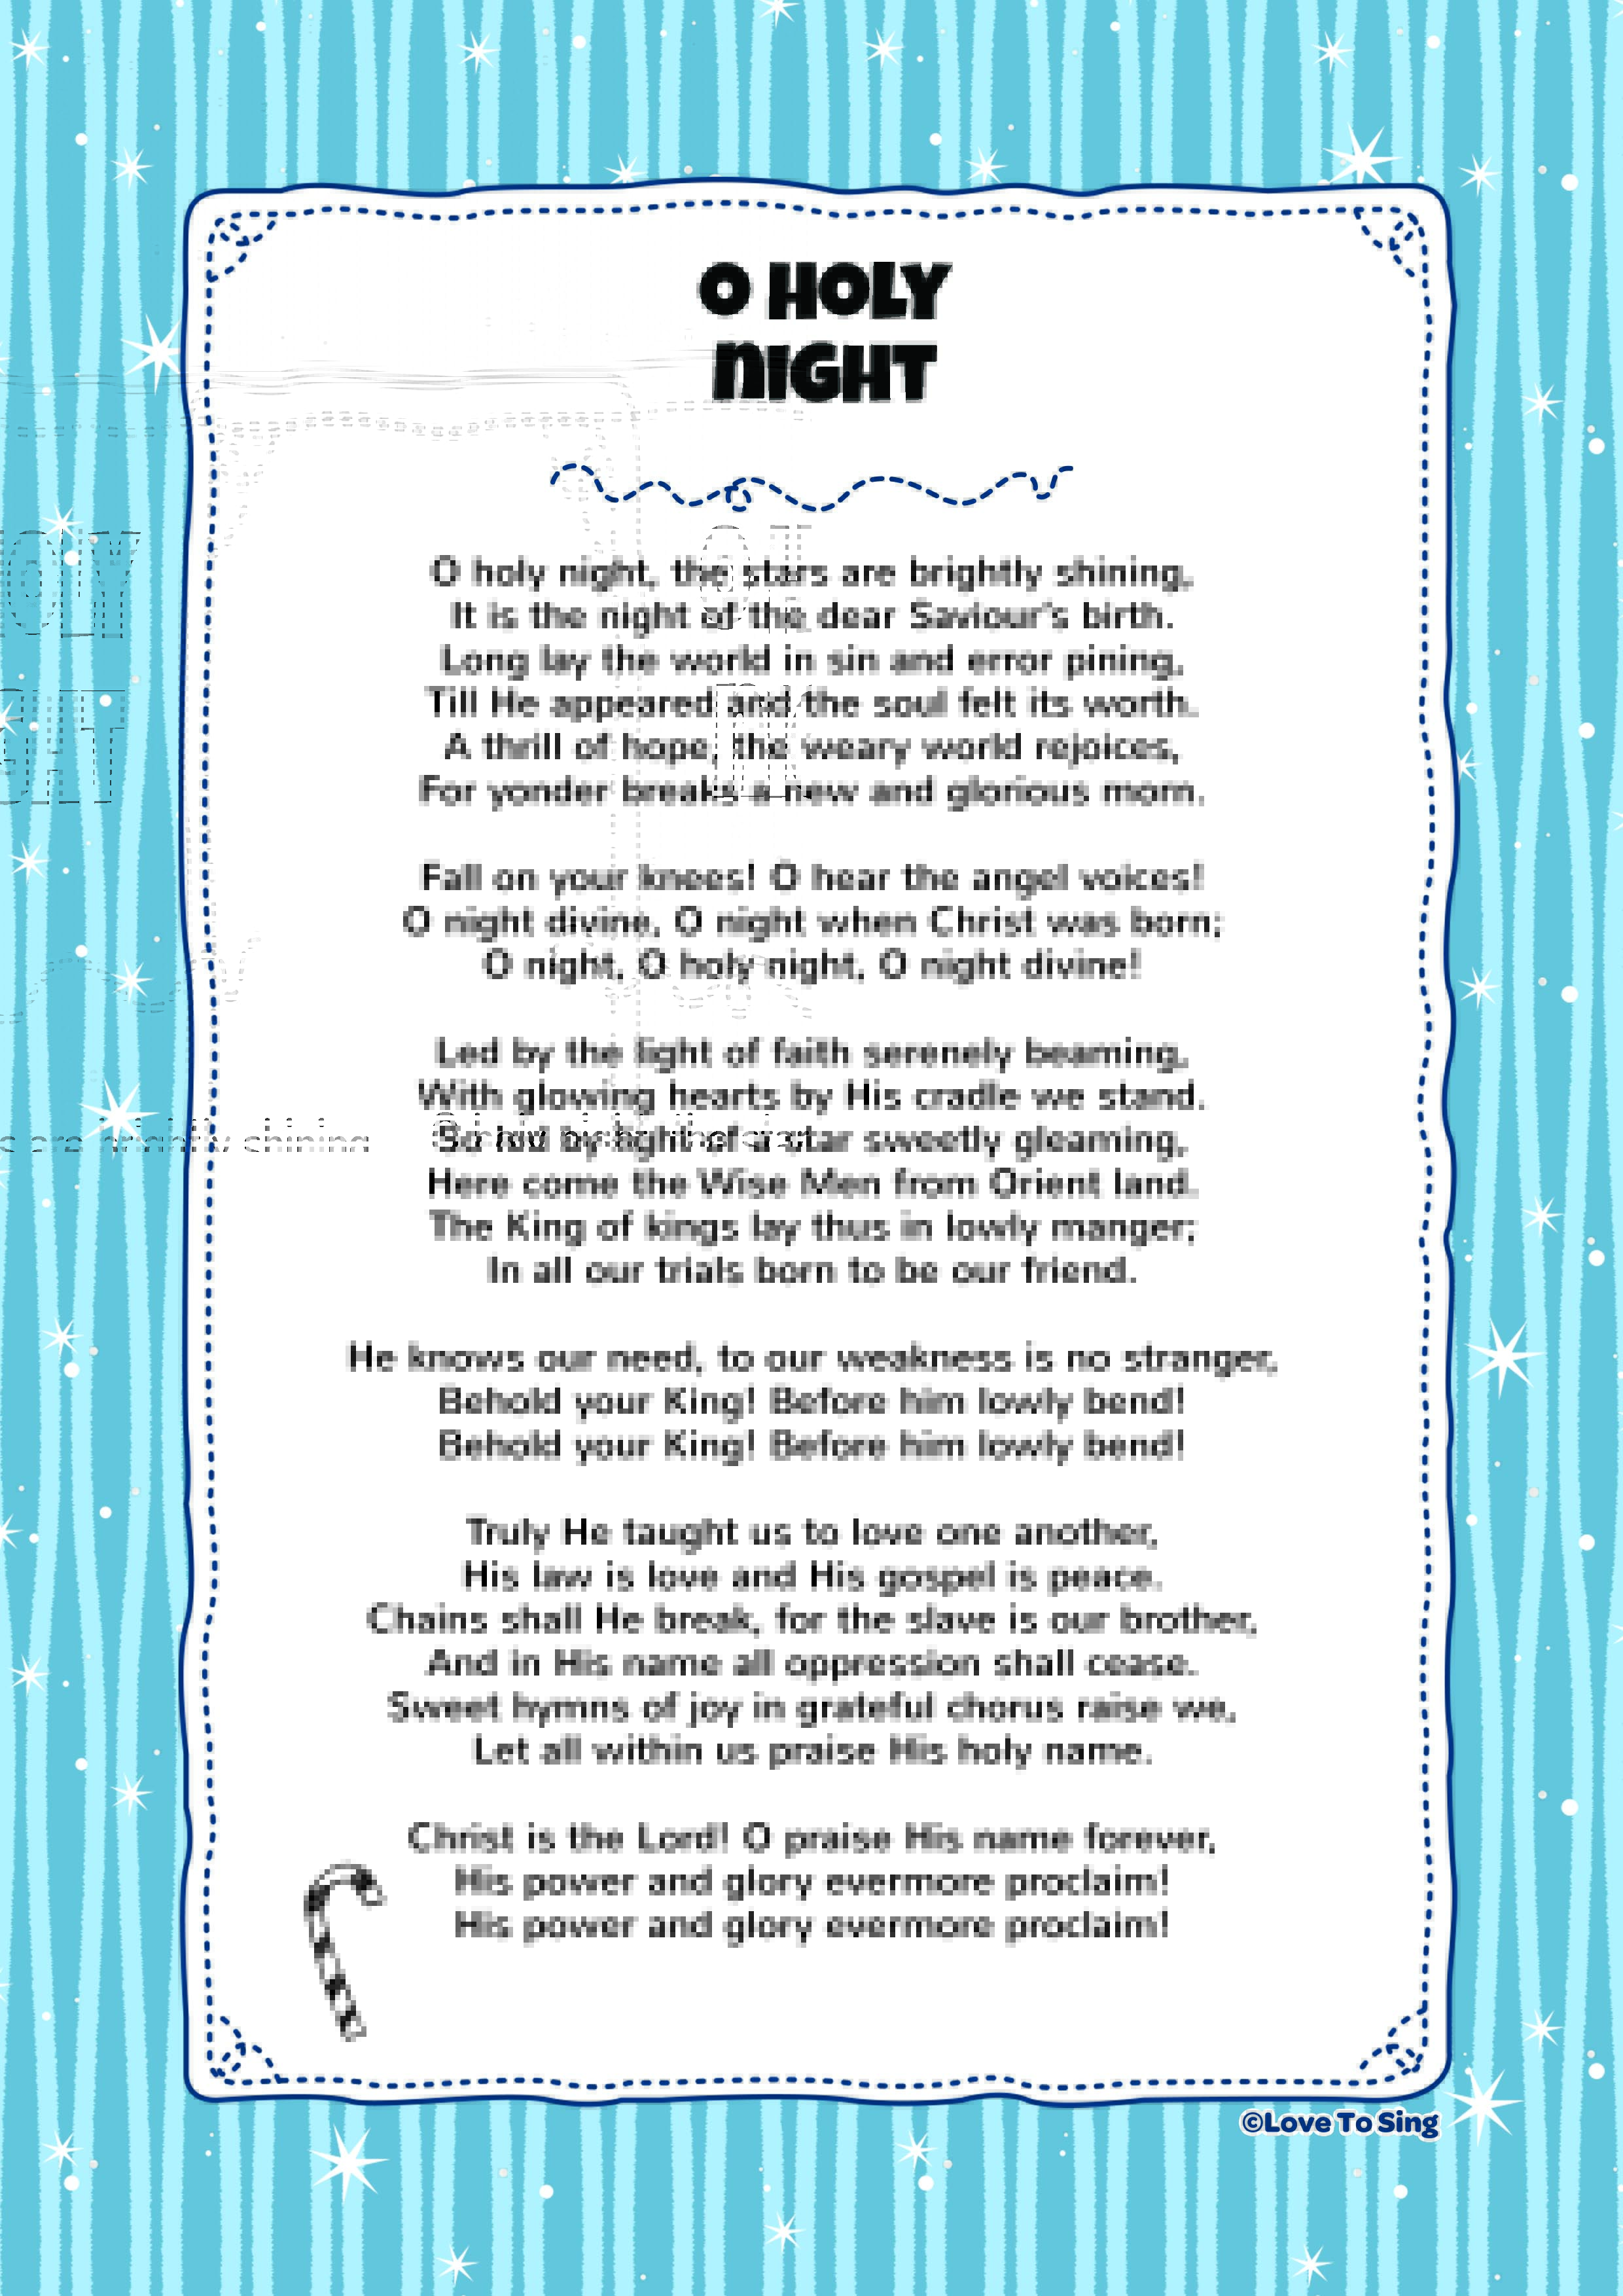 O Holy Night | Kids Video Song with FREE Lyrics & Activities!